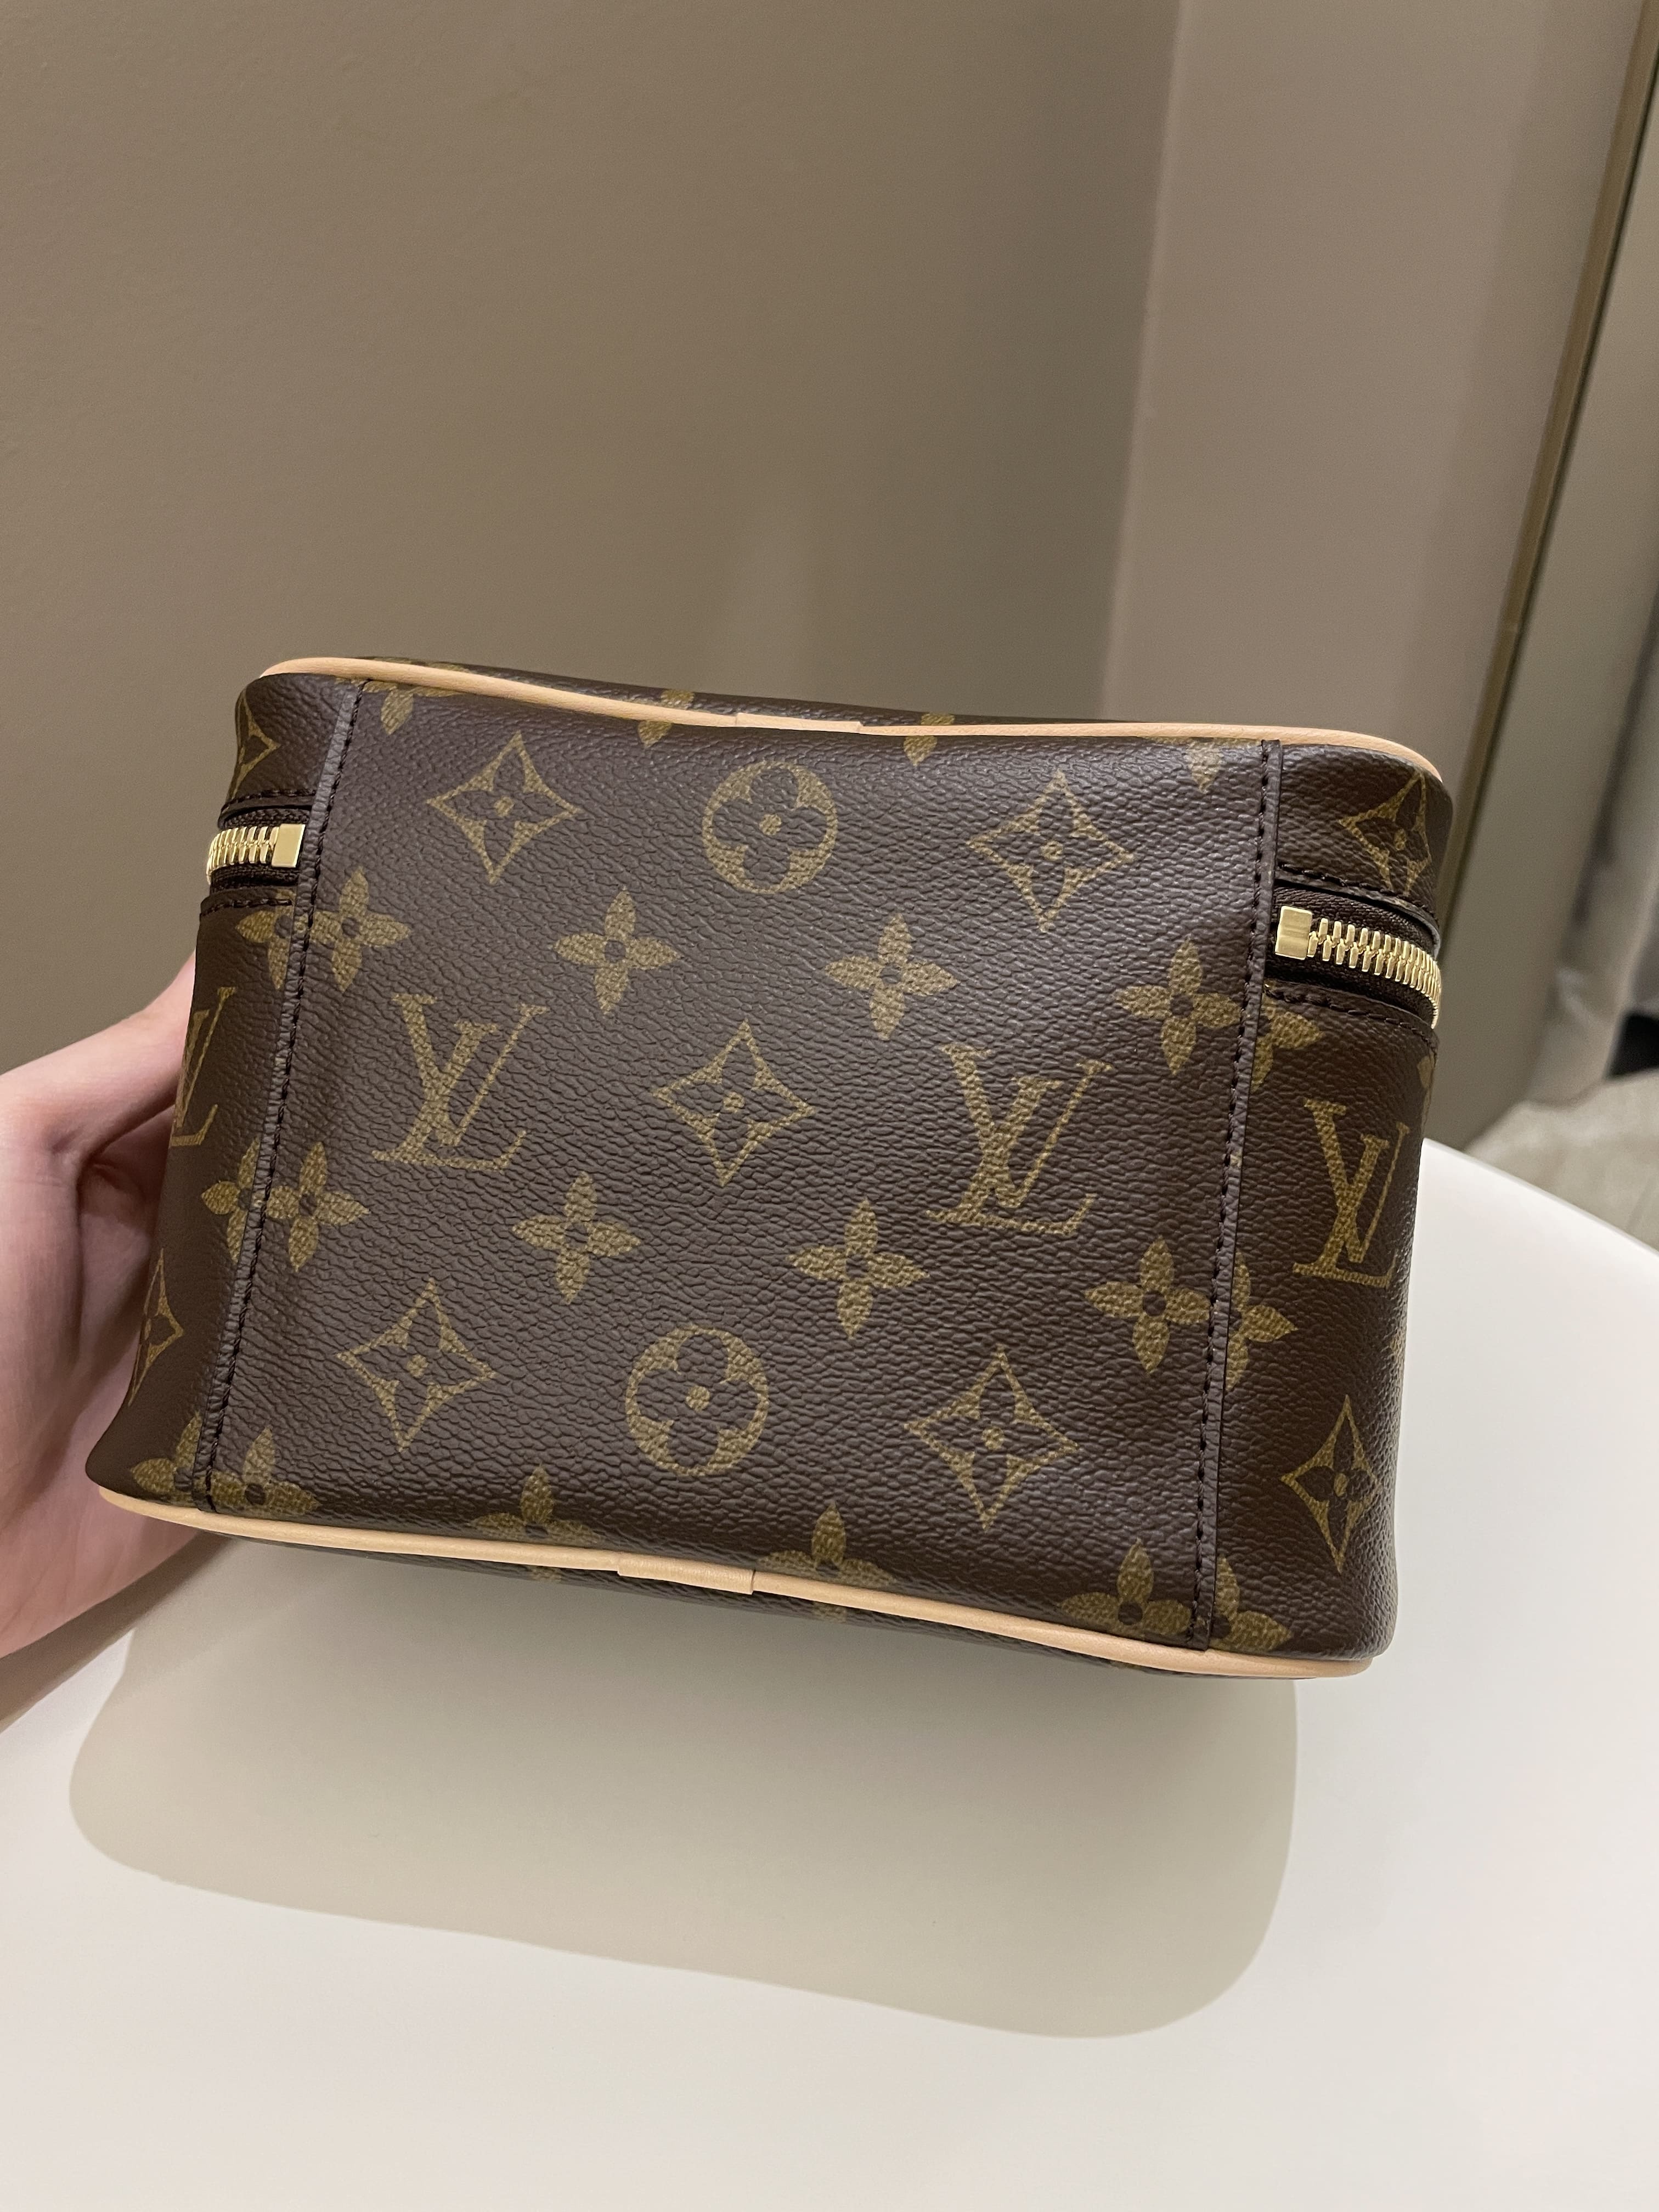 LOUIS VUITTON - NICE BB DETAILED REVIEW